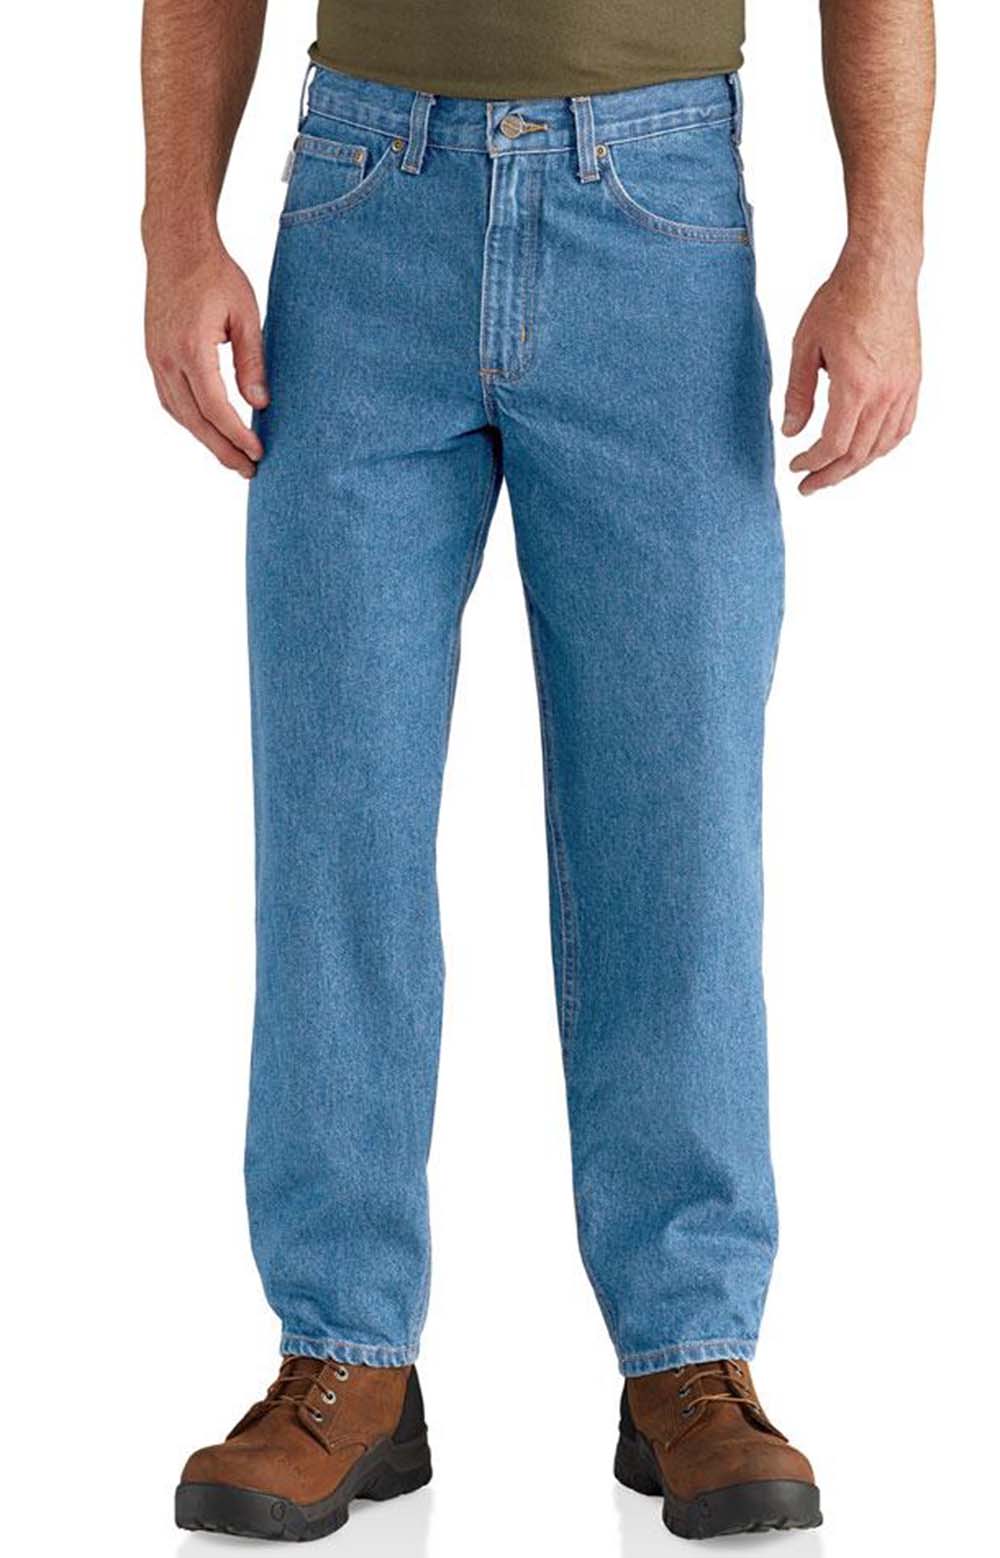 (B17) Relaxed Fit Tapered Leg Jeans - Stonewash